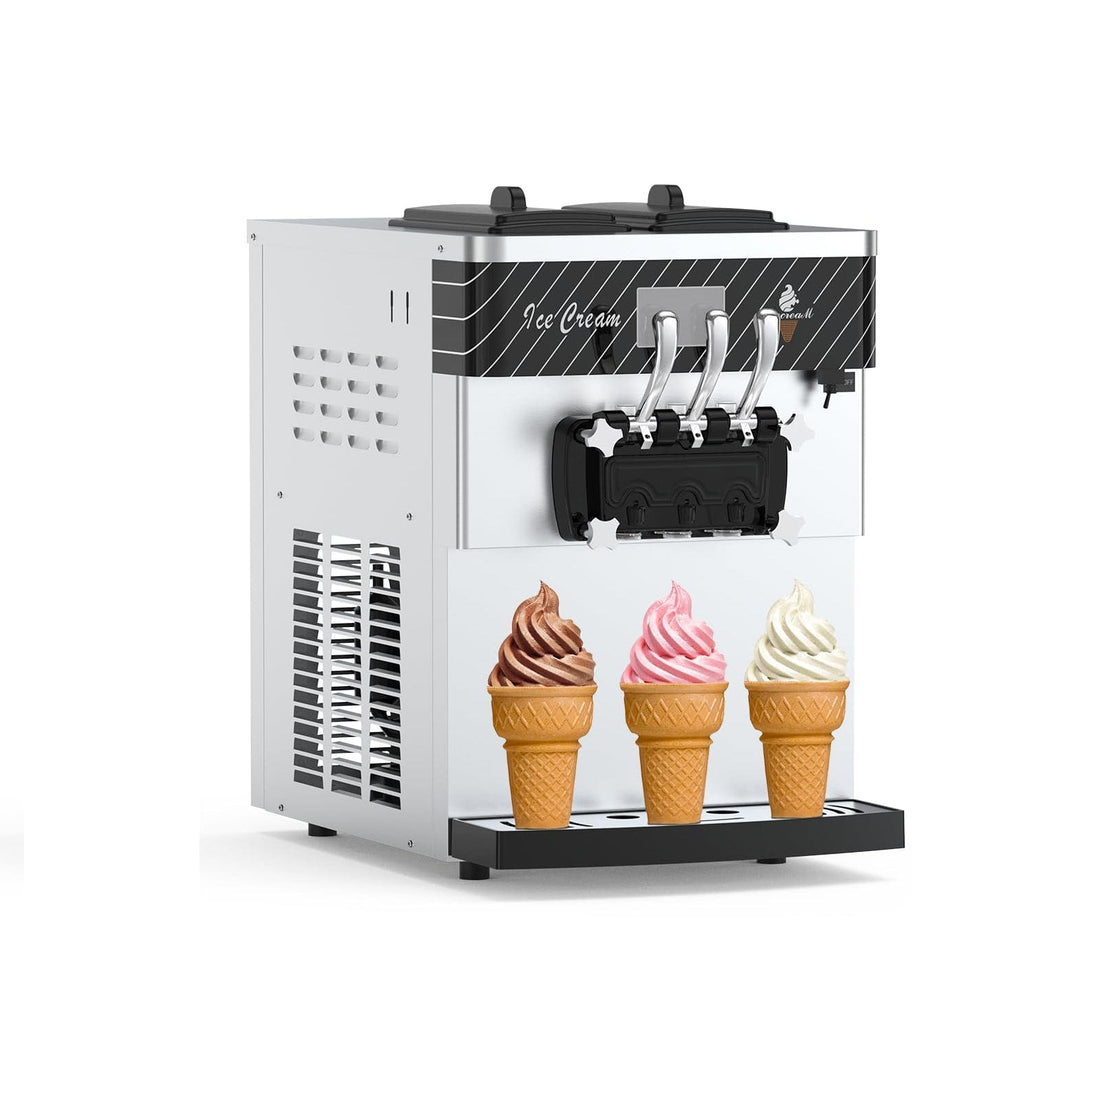 Premium 3-Flavor Soft Serve Ice Cream Machine - High Yield, Large Capacity, and Easy Cleaning